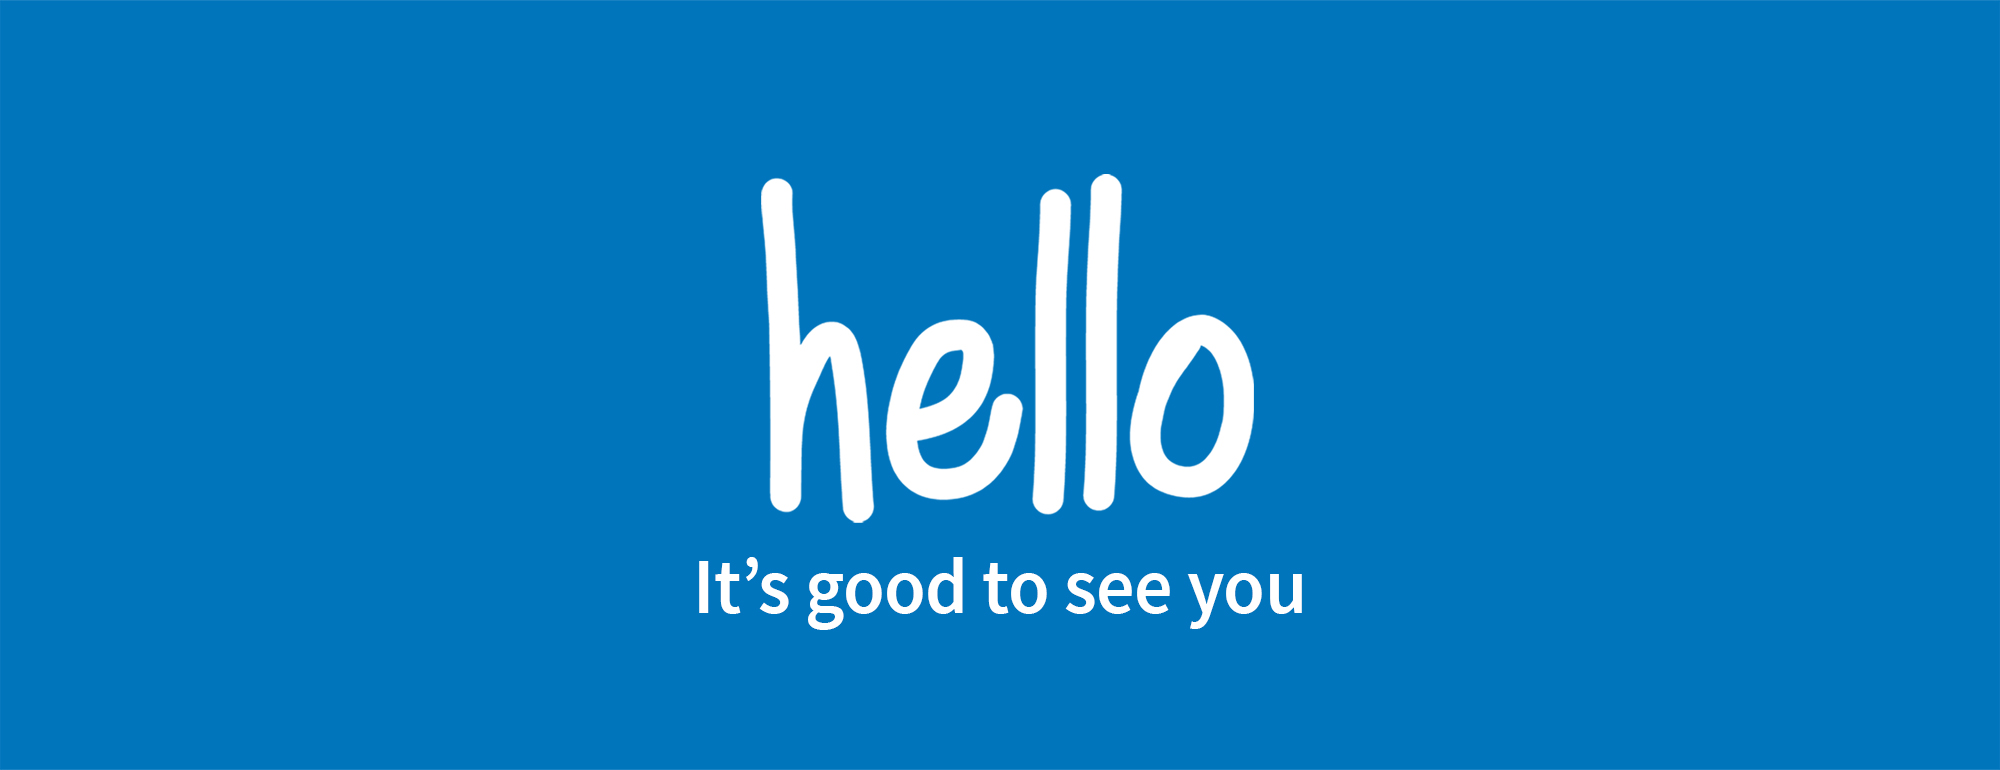 Text with hello it's good to see you